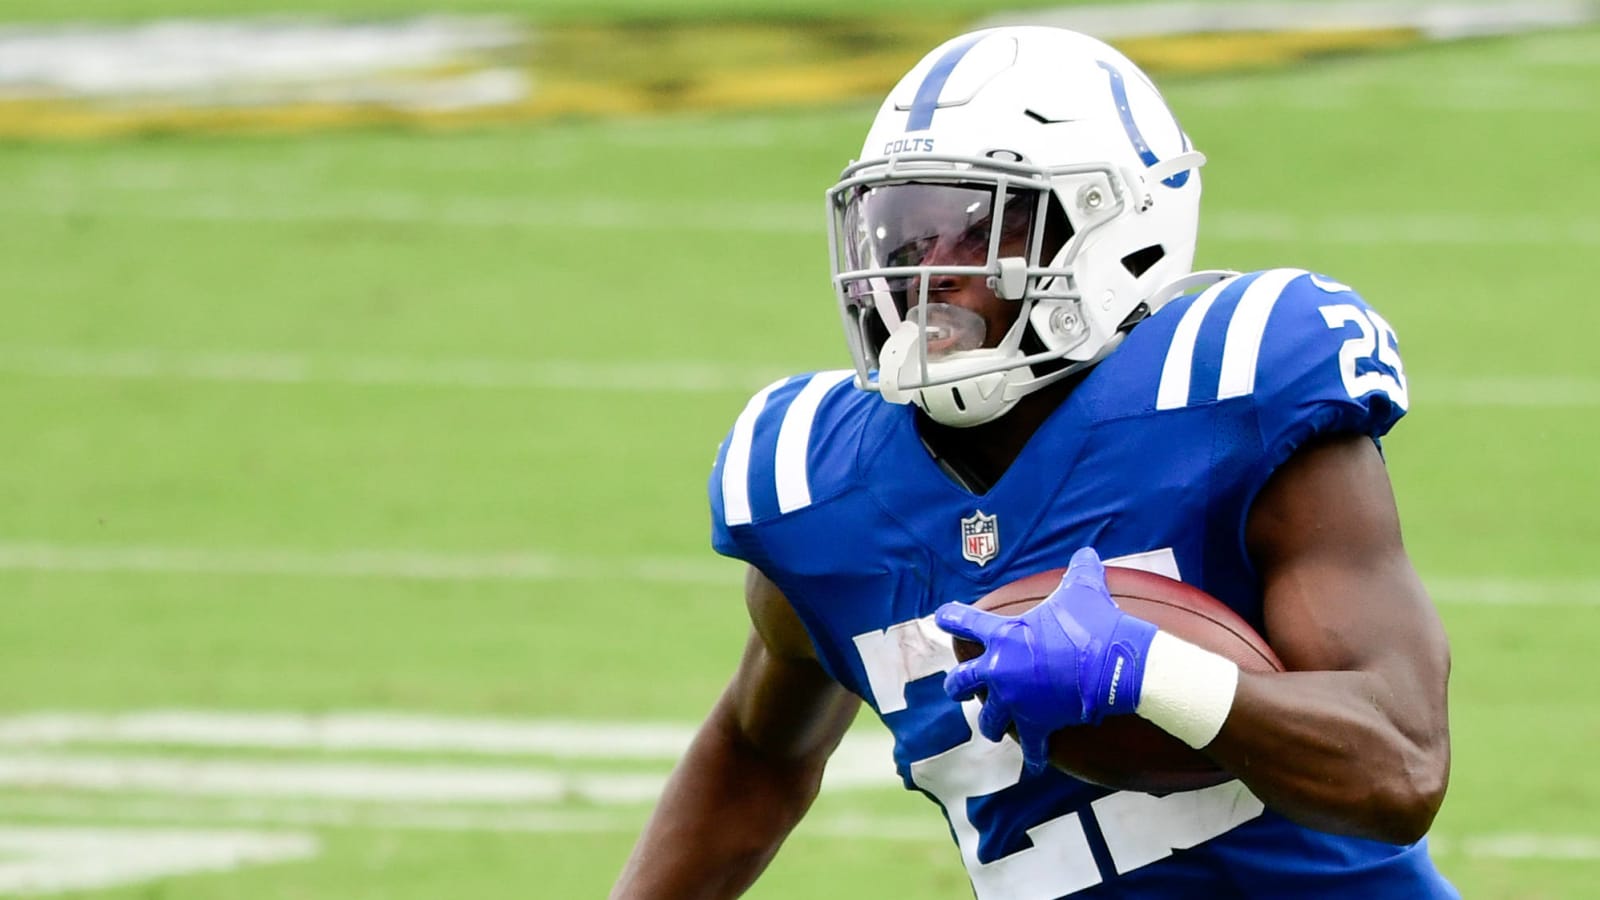 Marlon Mack says trade request a 'mutual agreement' with Colts